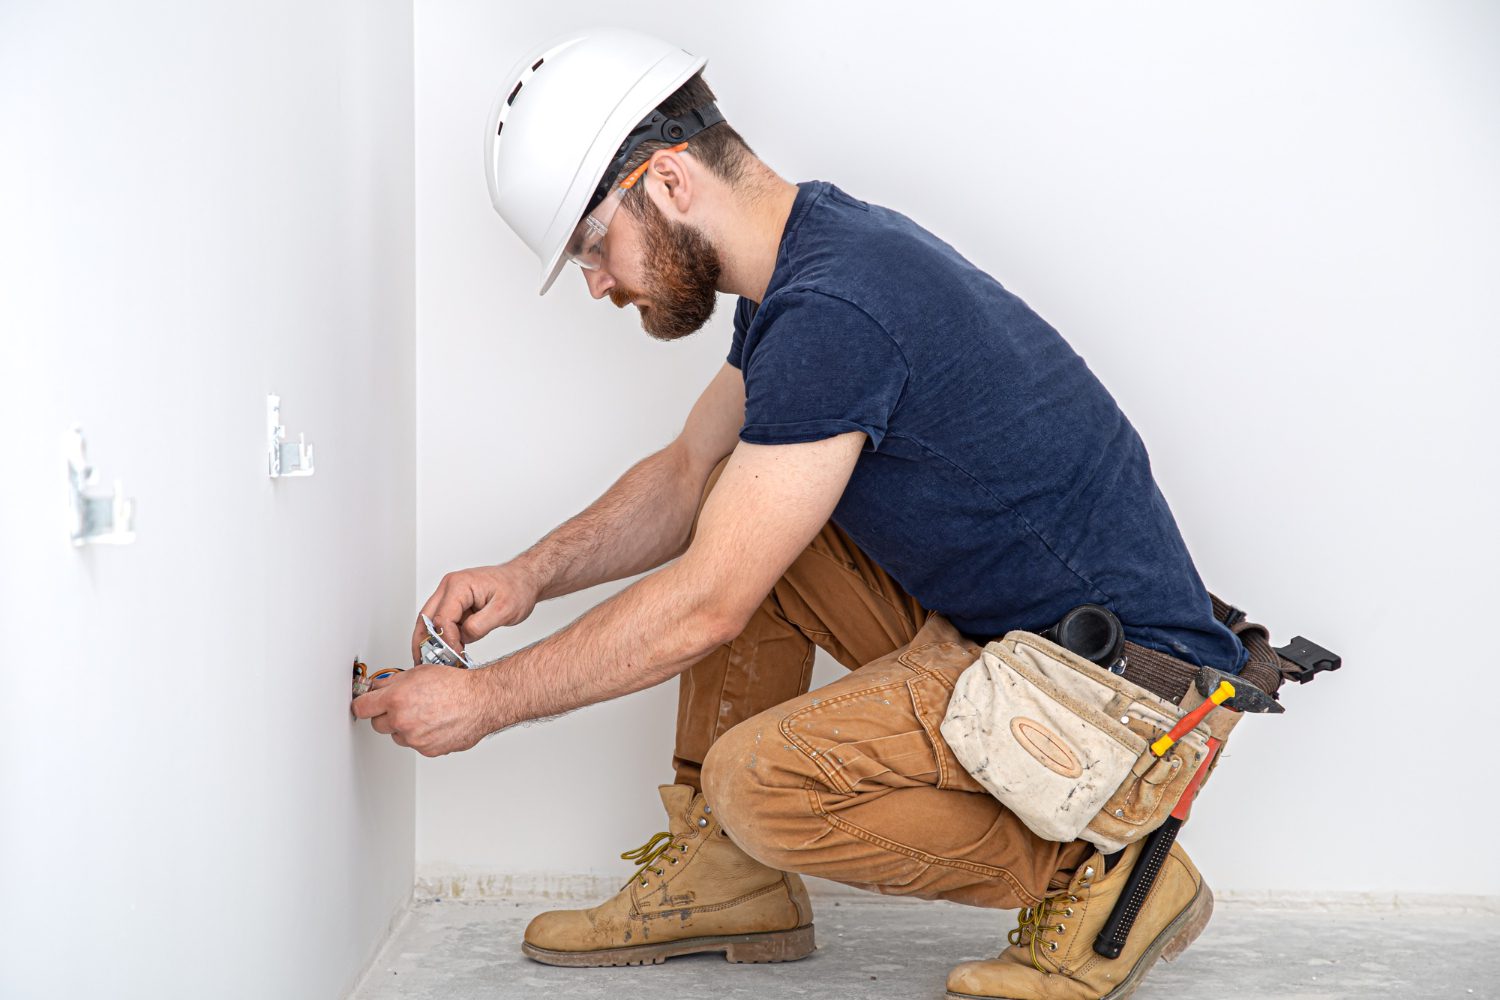 Residential electrical repairs and installation in the Houston area